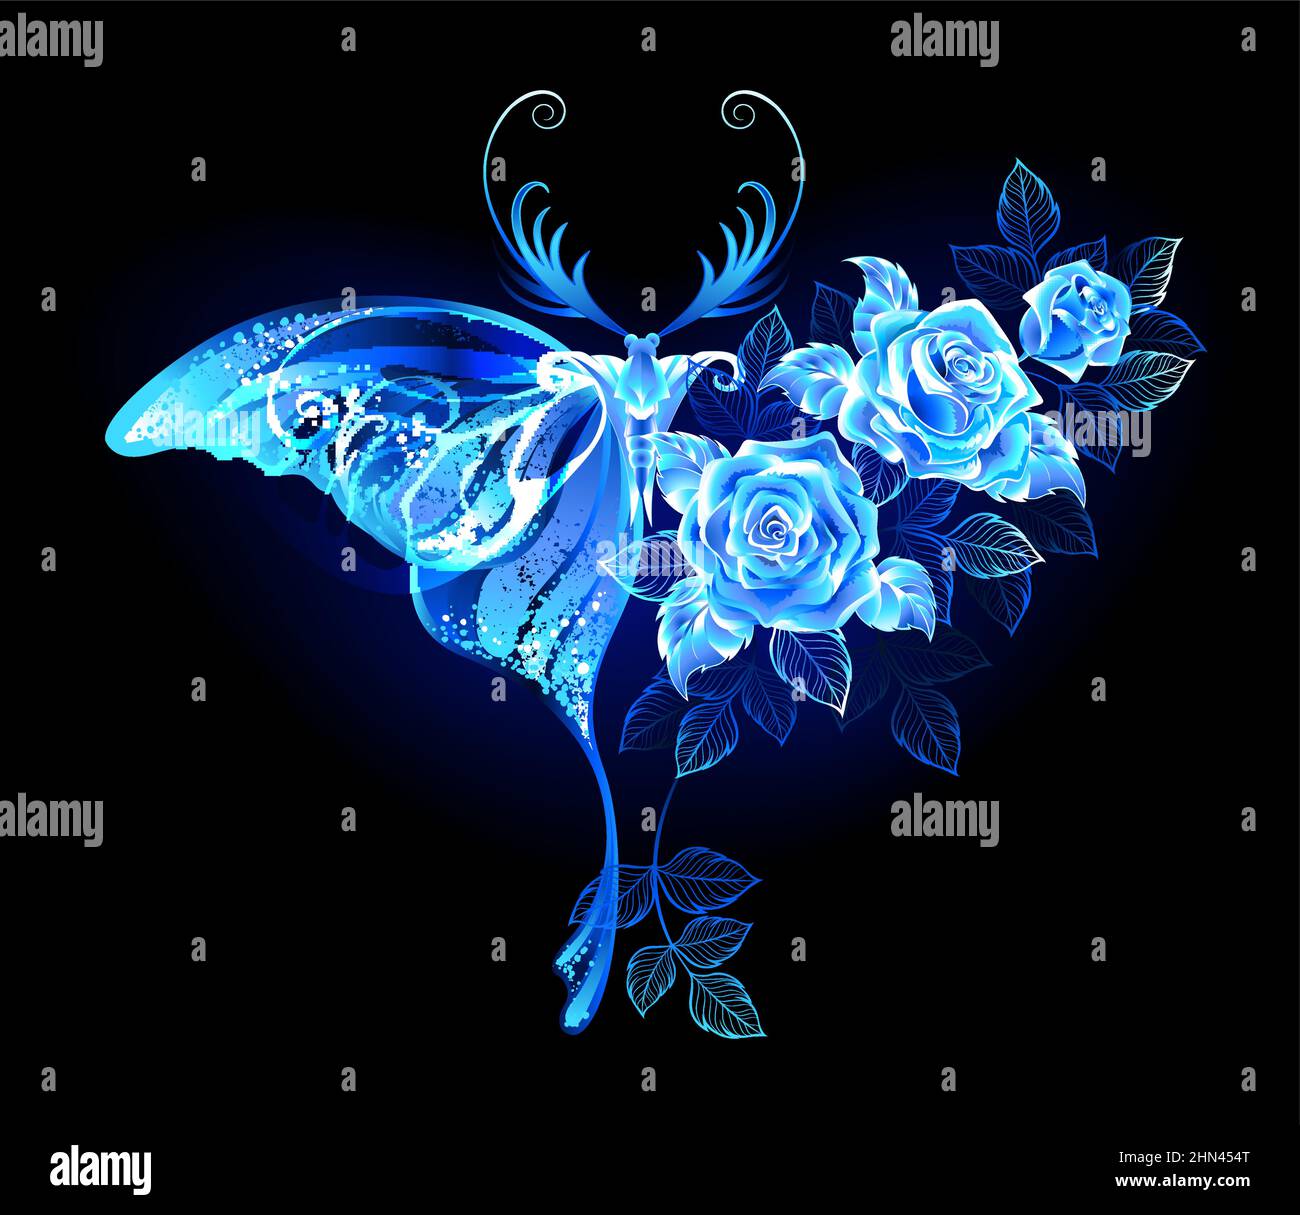 Luminous, magical, blue, floral, night butterfly with  wing decorated with blue, blooming, luxurious, glowing roses on black background. Stock Vector